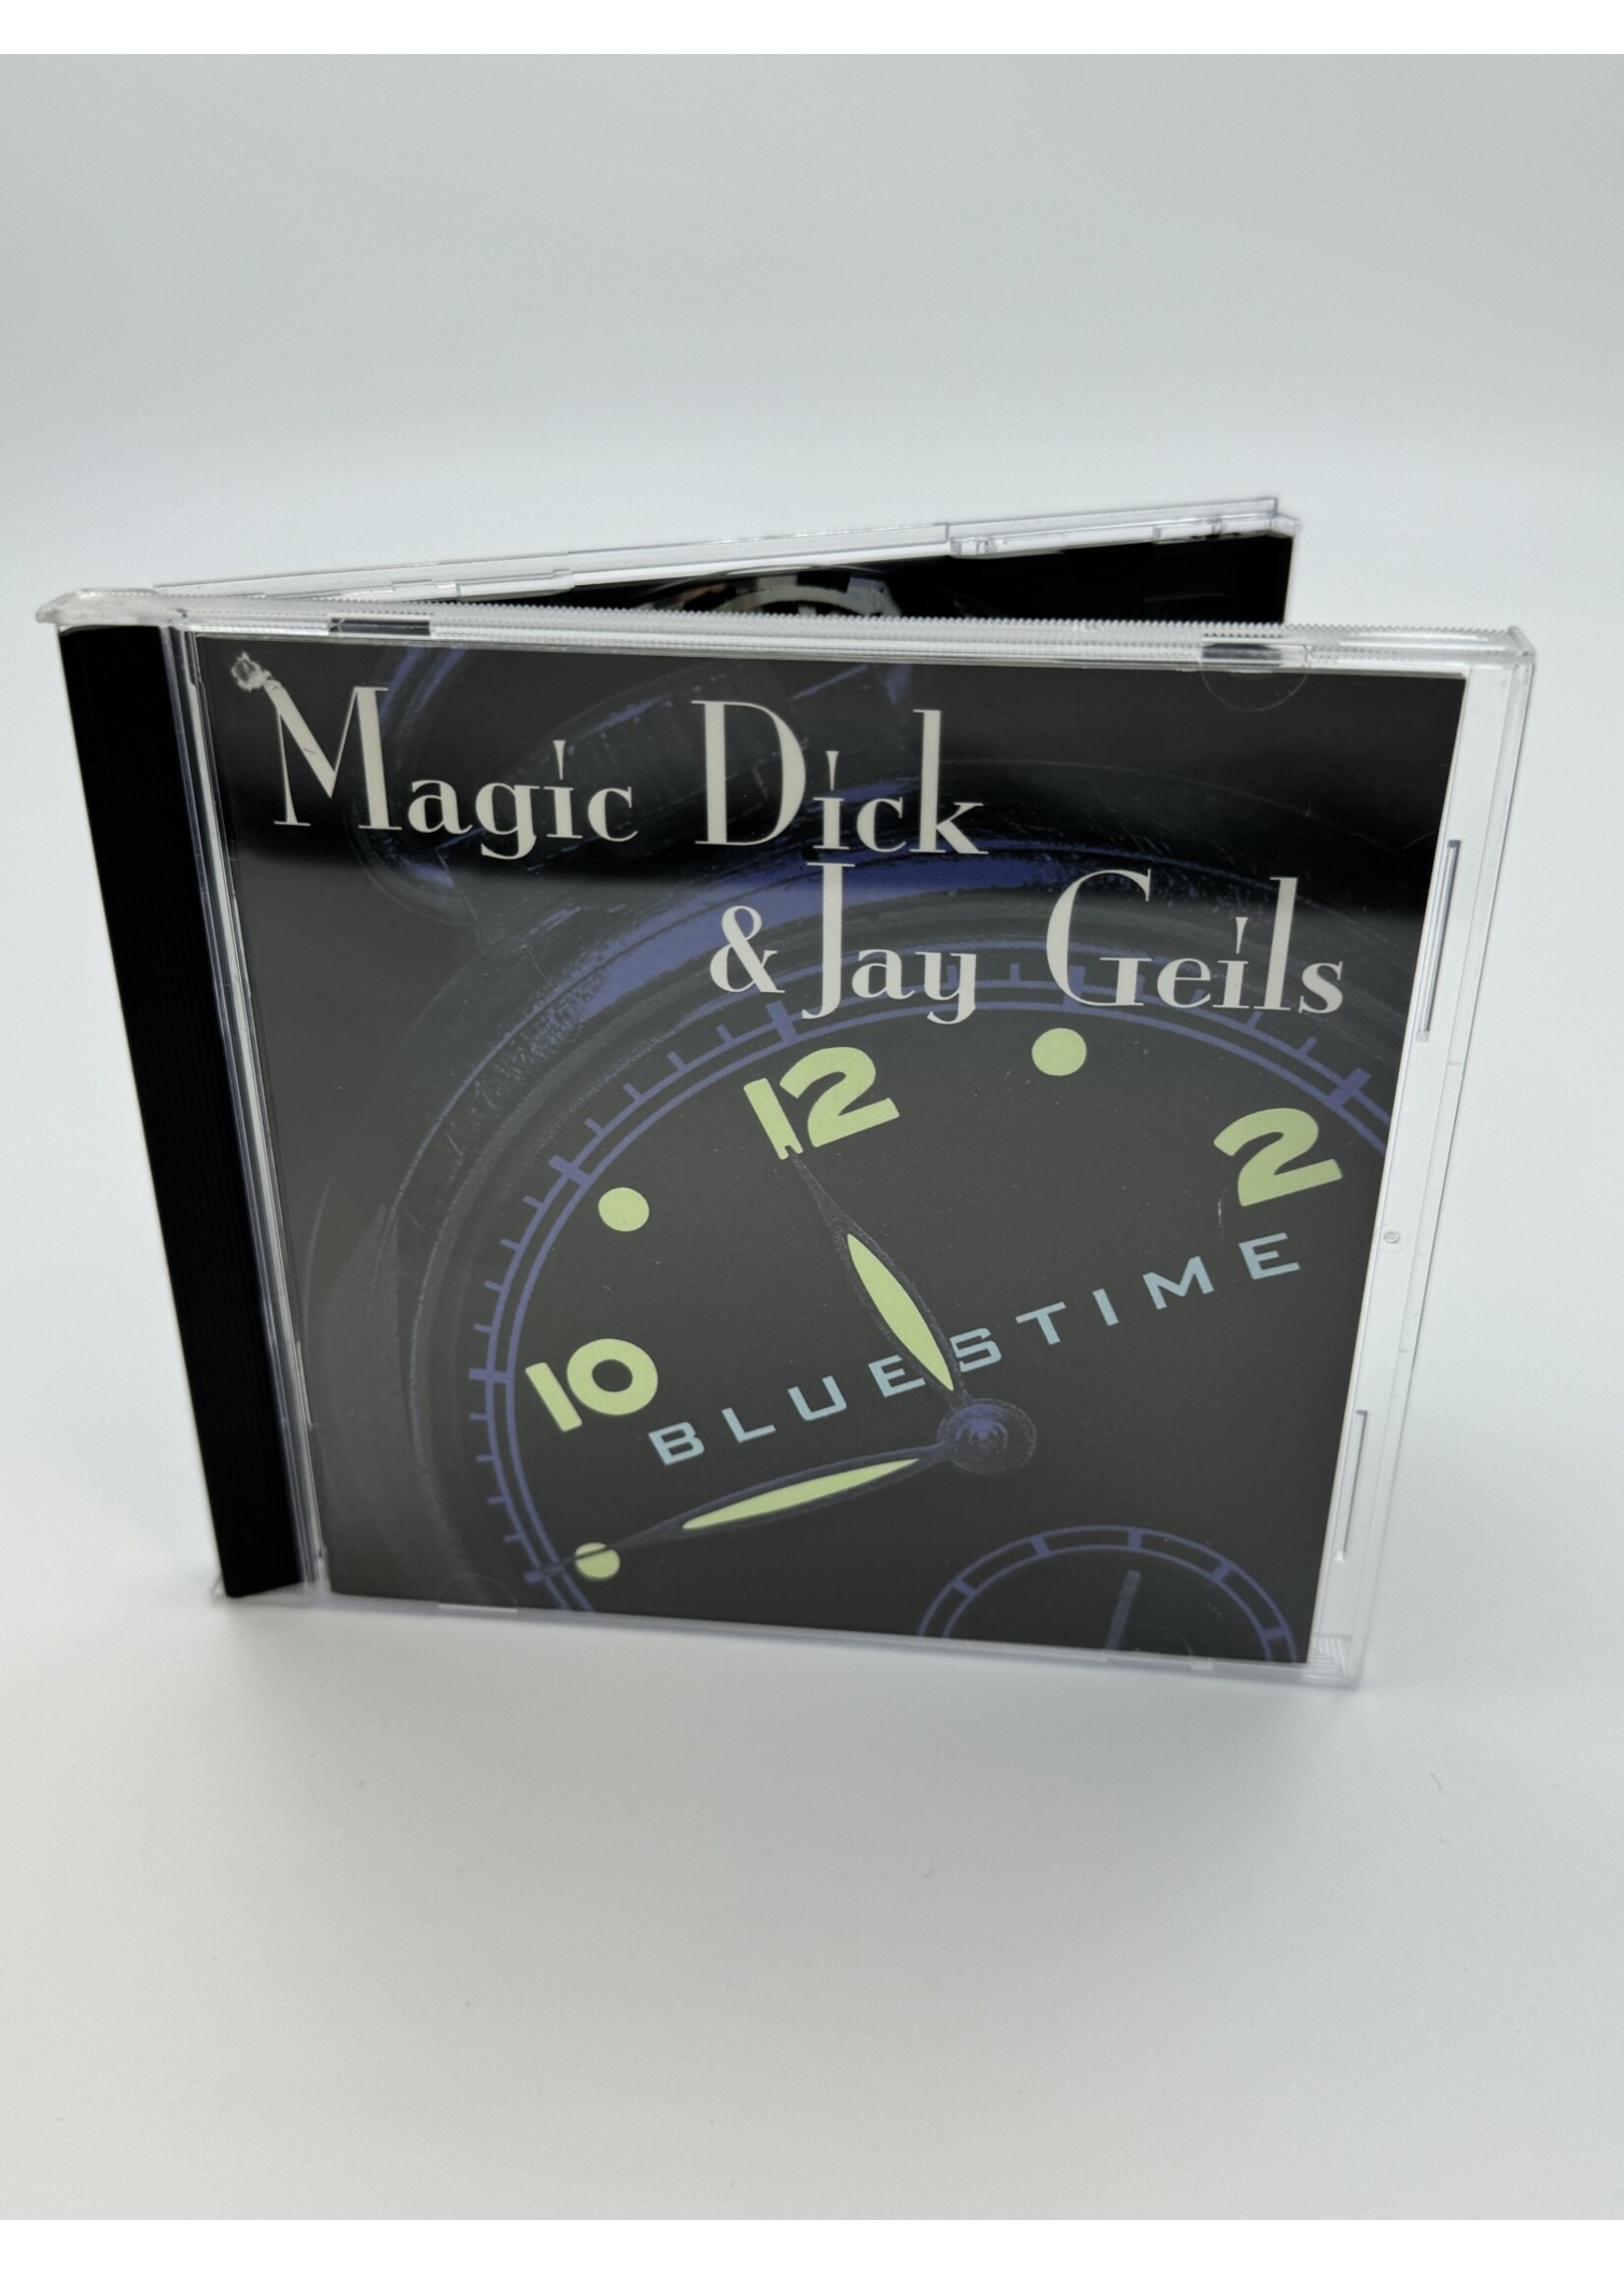 CD Bluestime With Magic Dick And Jay Geils CD